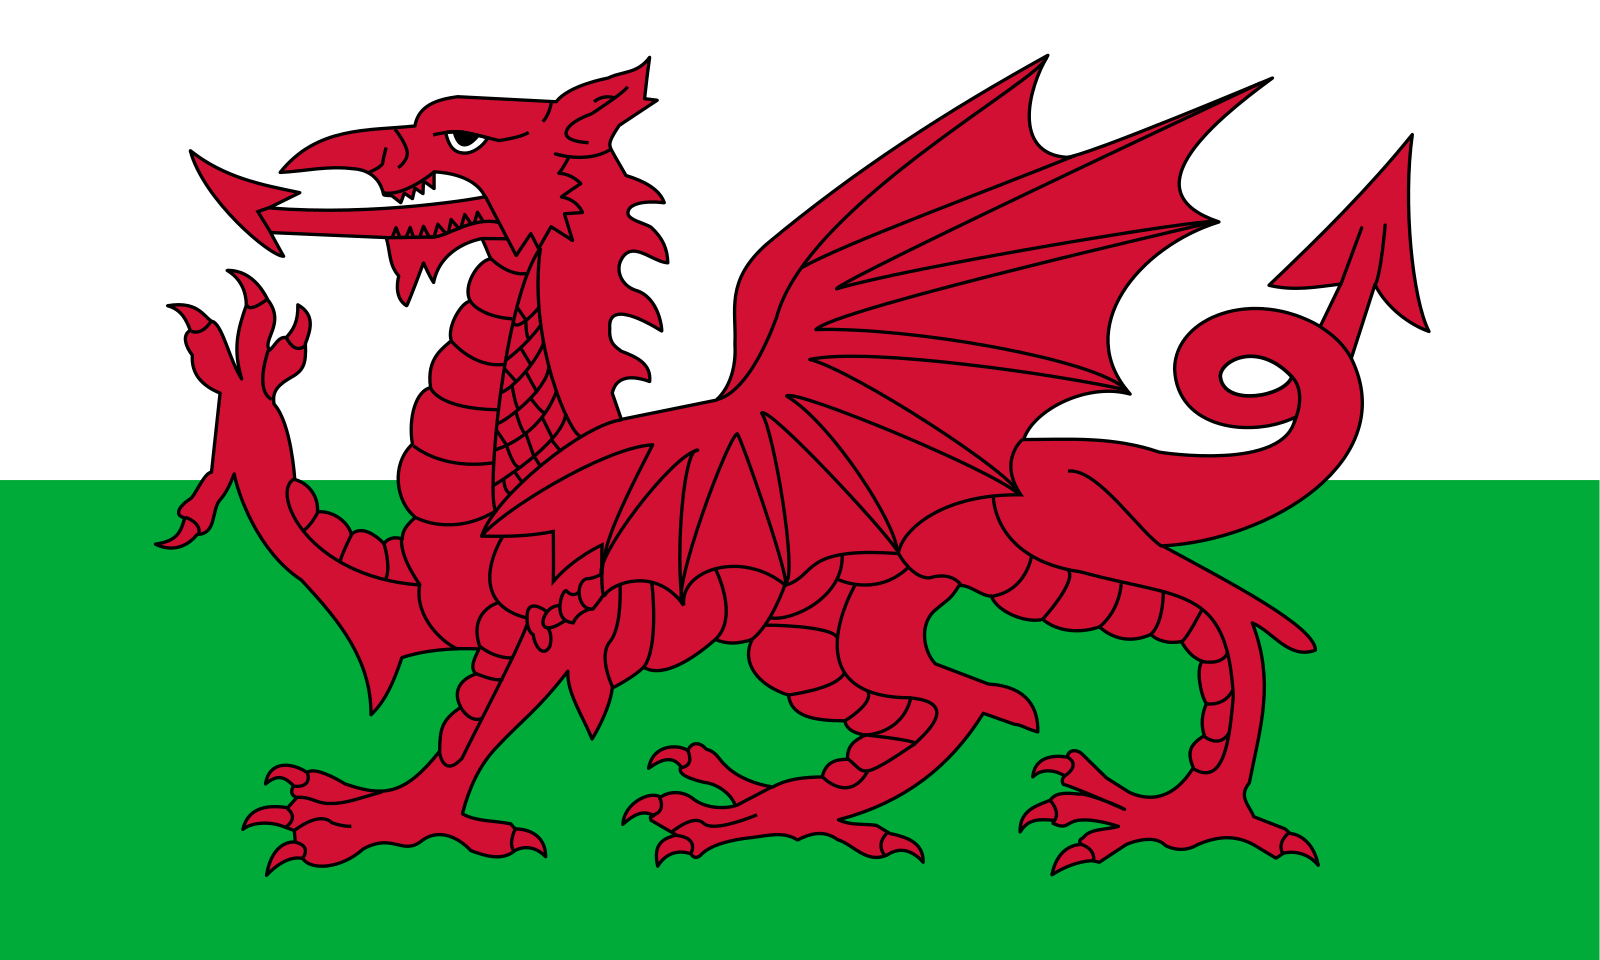 Welsh Christian Party Demands a New National Flag, With a Cross ...